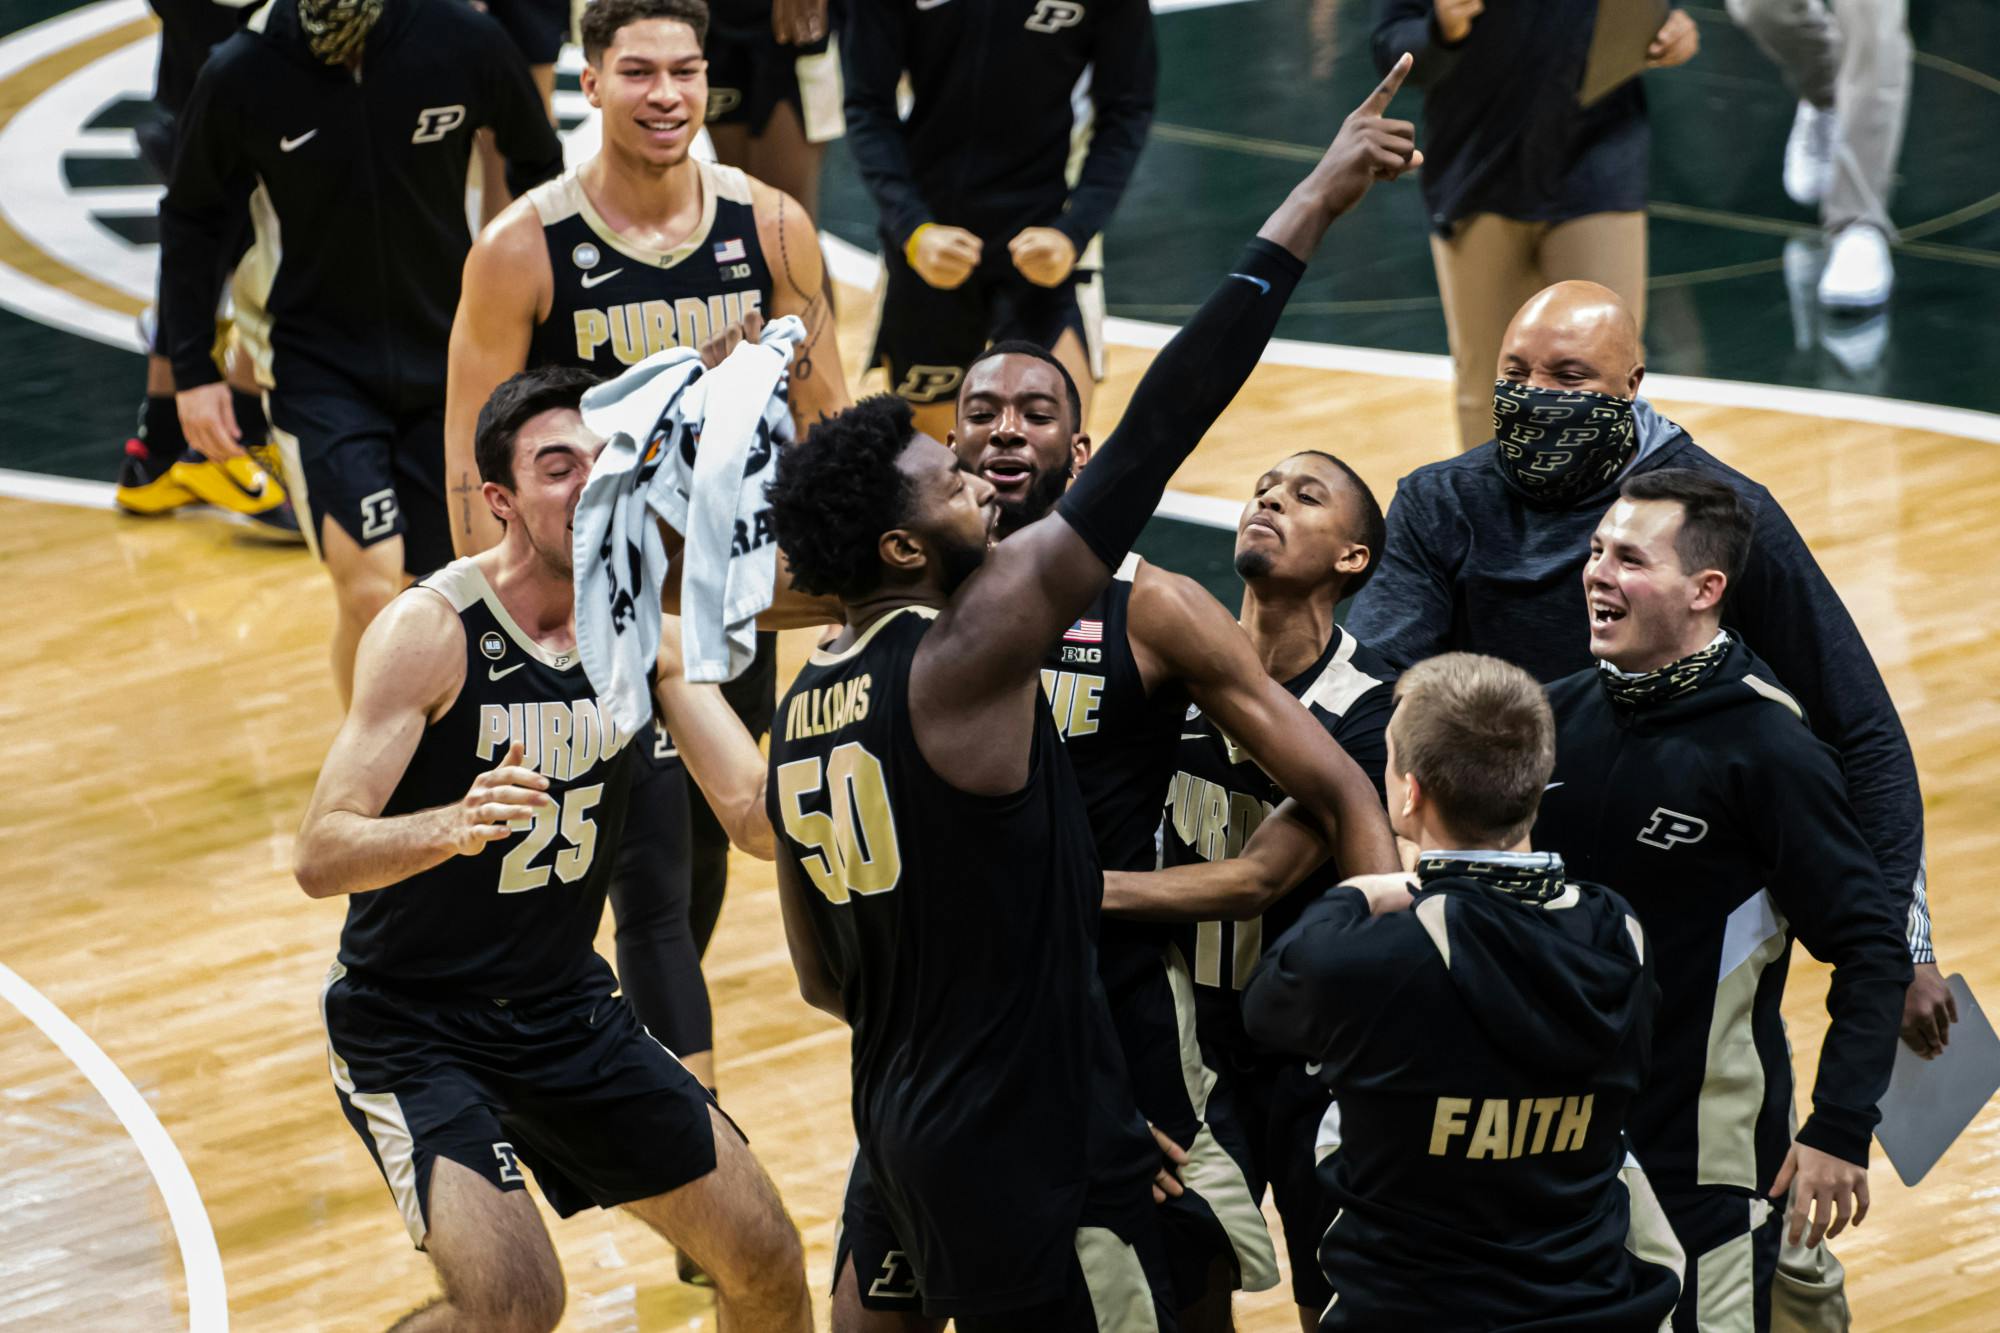 <p>Junior forward Trevion Williams points to the stands in celebration after scoring on the Boilermakers&#x27; last possession to help secure a comeback victory against the Spartans on Jan. 8, 2021.</p>